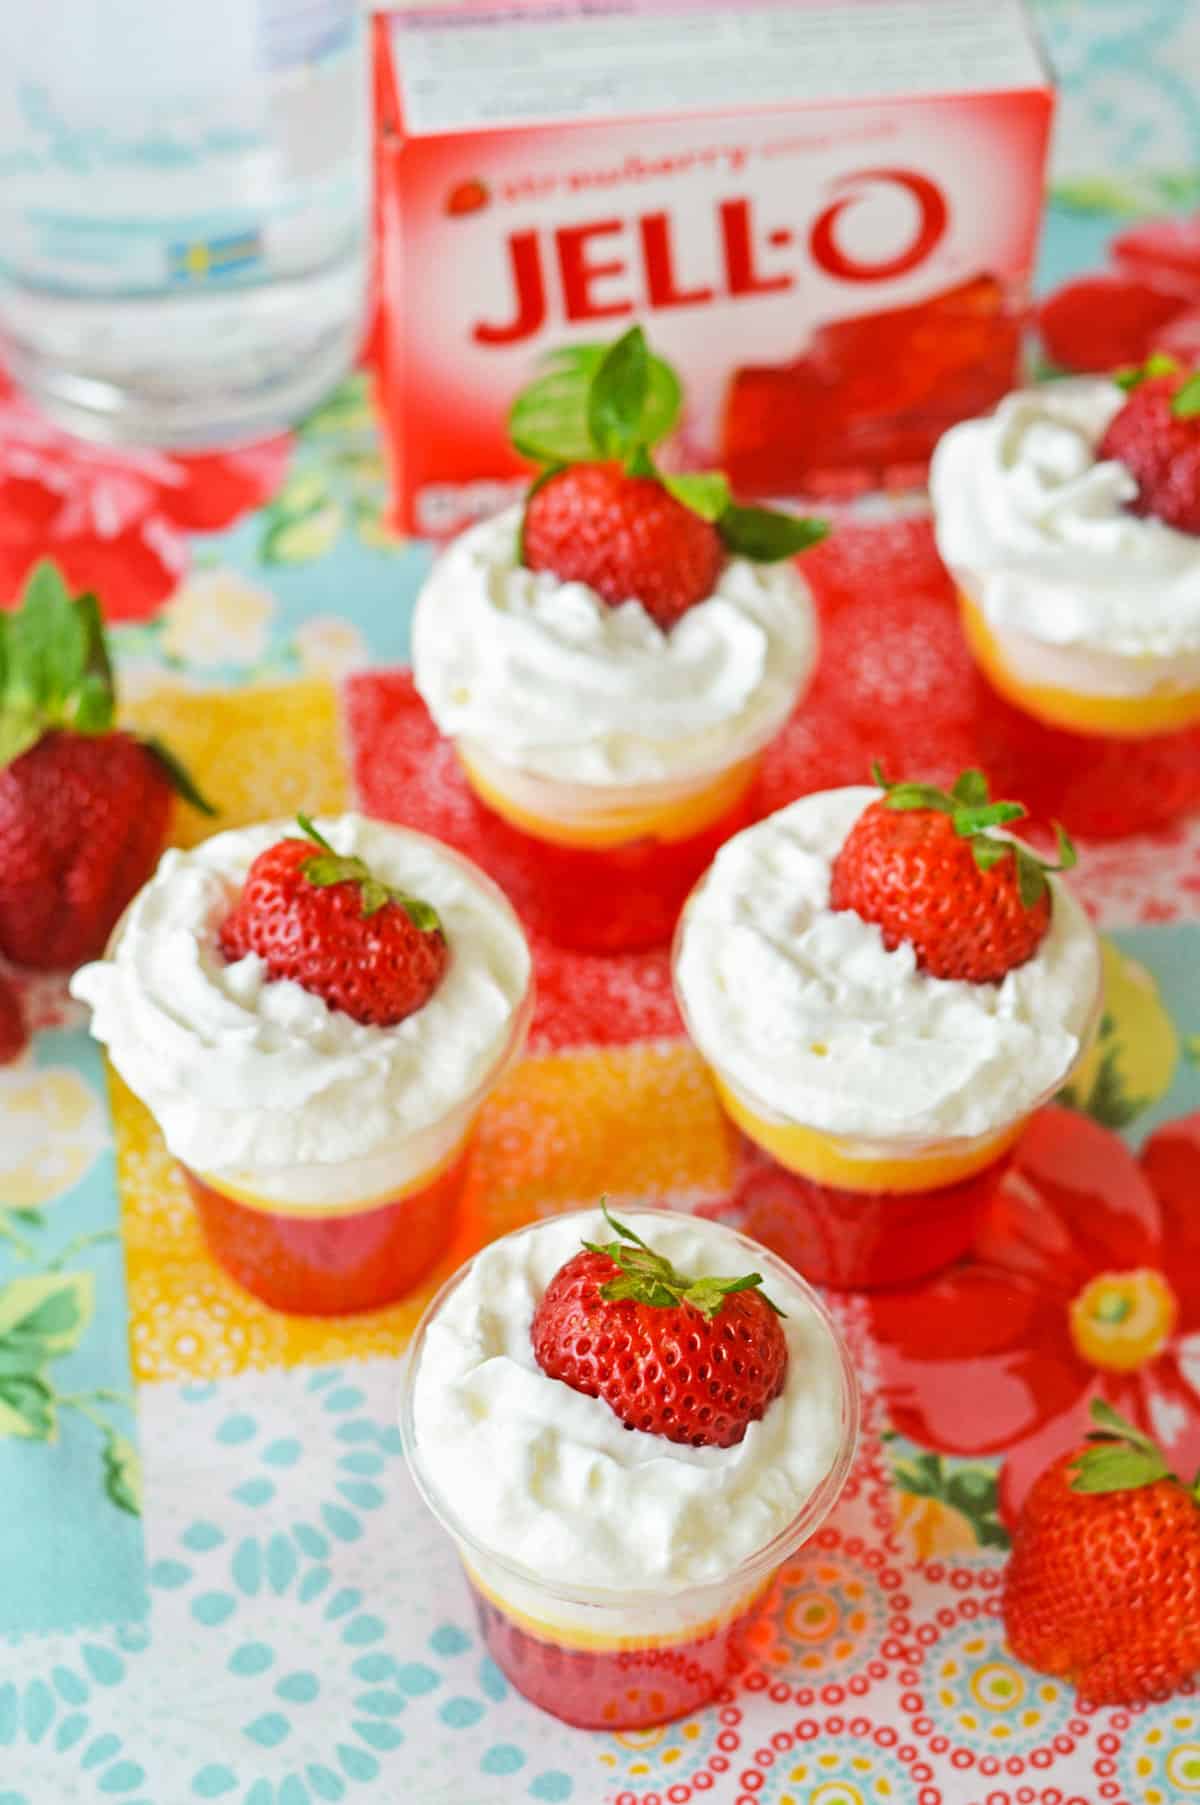 Five strawberry and cream jello shots with whipped cream and fresh strawberries on a patterned table cloth with a box of strawberry jello mix.